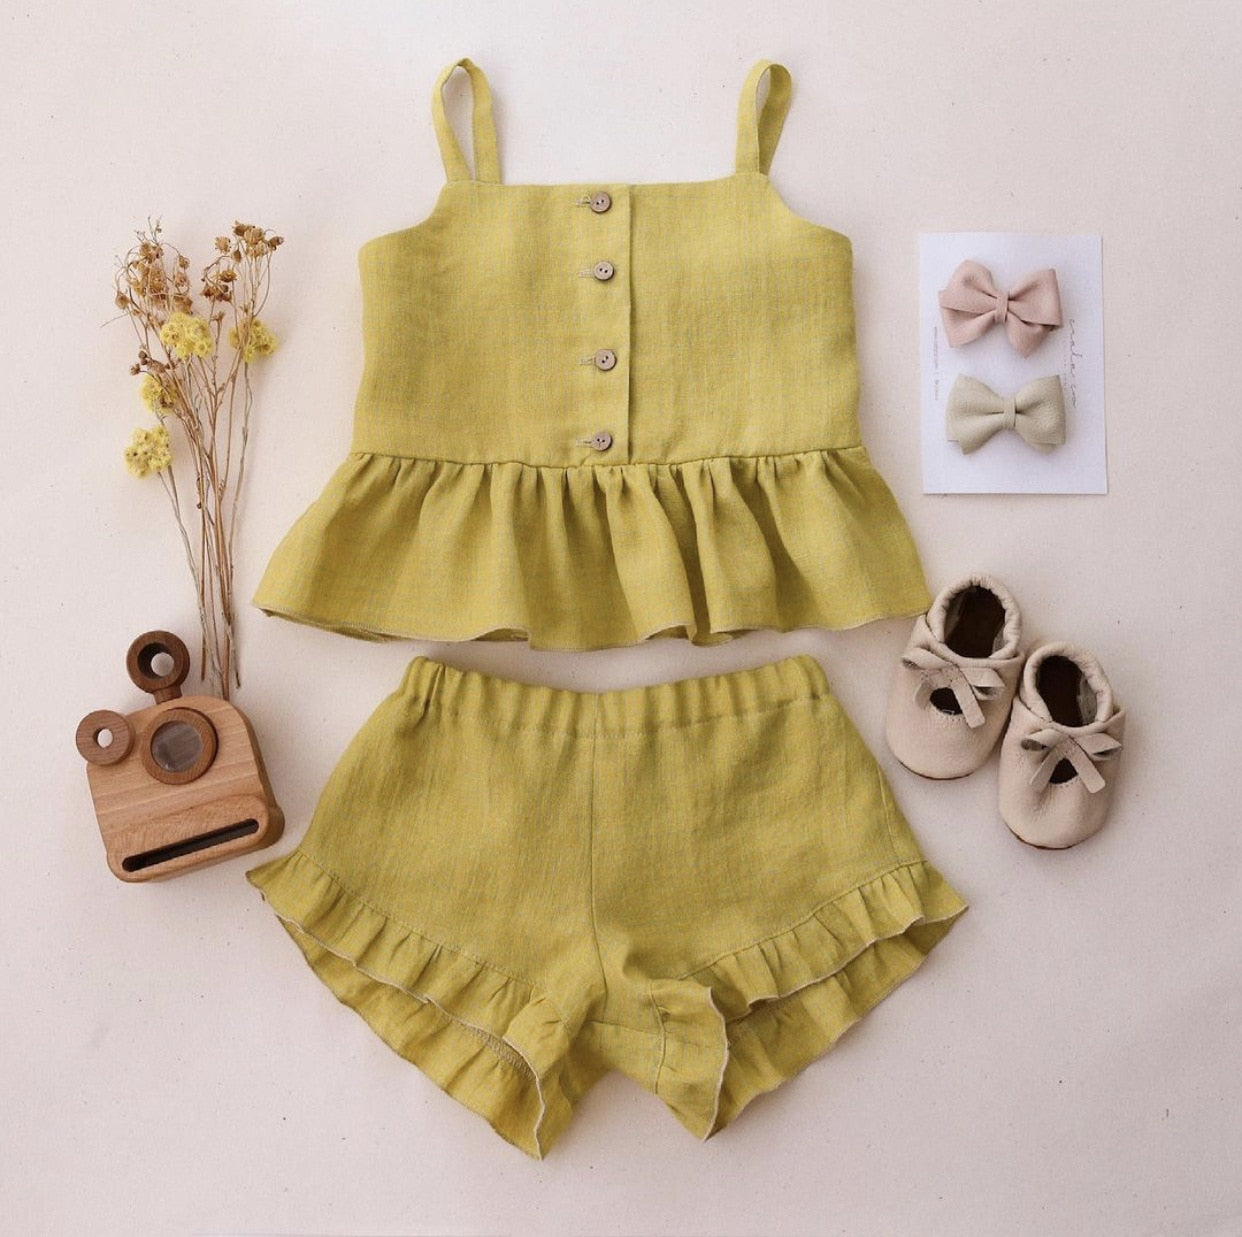 New Baby Girl Suits Summer Clothes Tops+Shorts Vest Harness Falbala Cotton Linen Solid Color Outfits Bebe Infant Clothing Sets